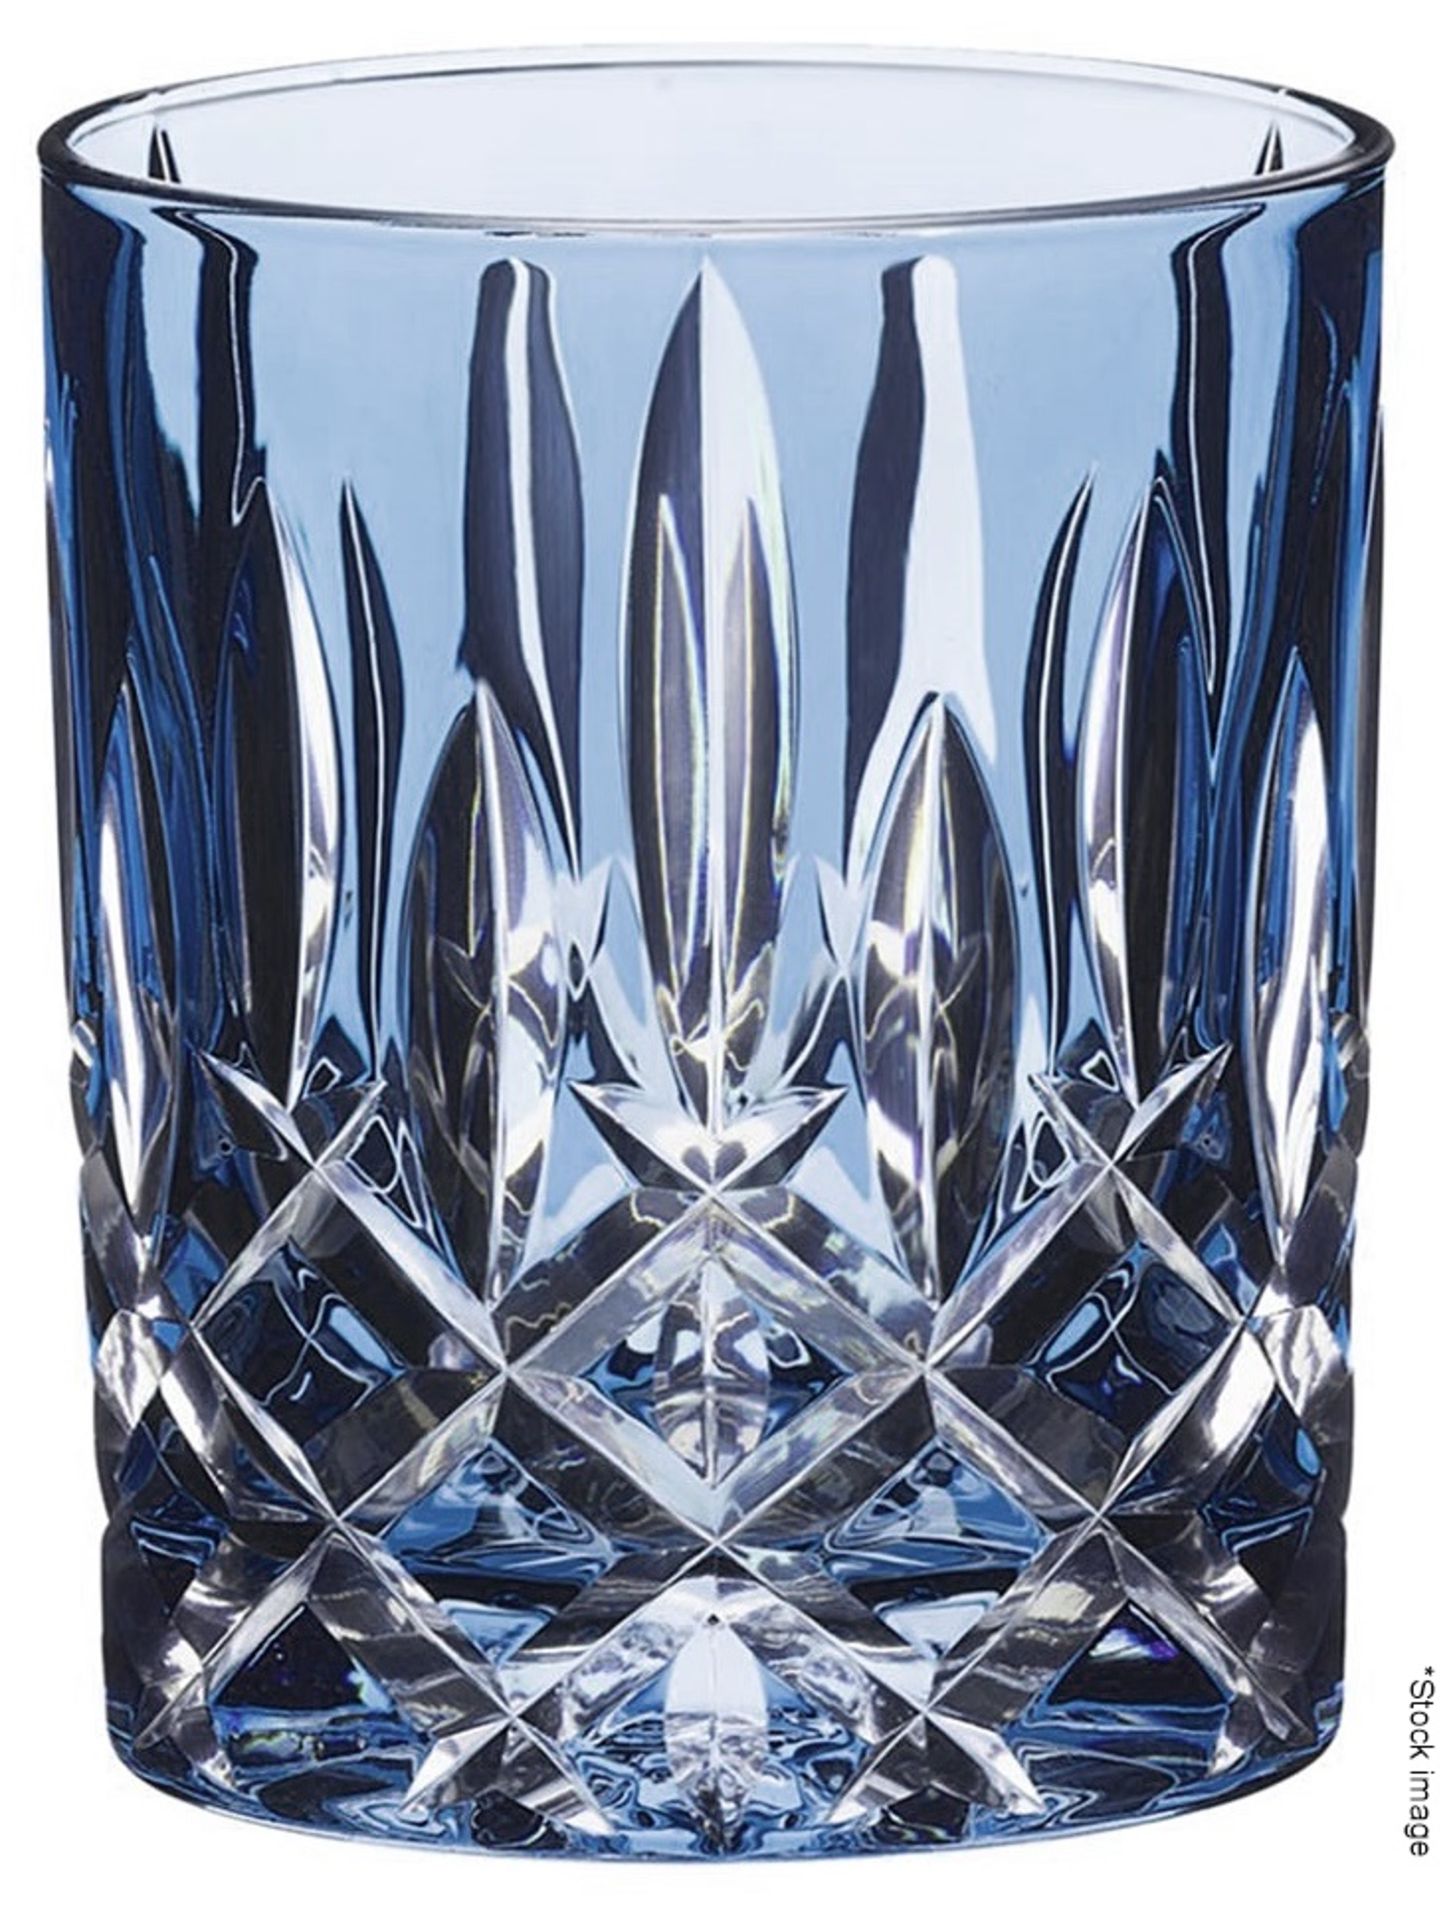 3 x RIEDEL 'Laudon' Luxury Crystal Whisky Glasses In Light Blue (295ml) - Total RRP £225.00 - Image 2 of 10